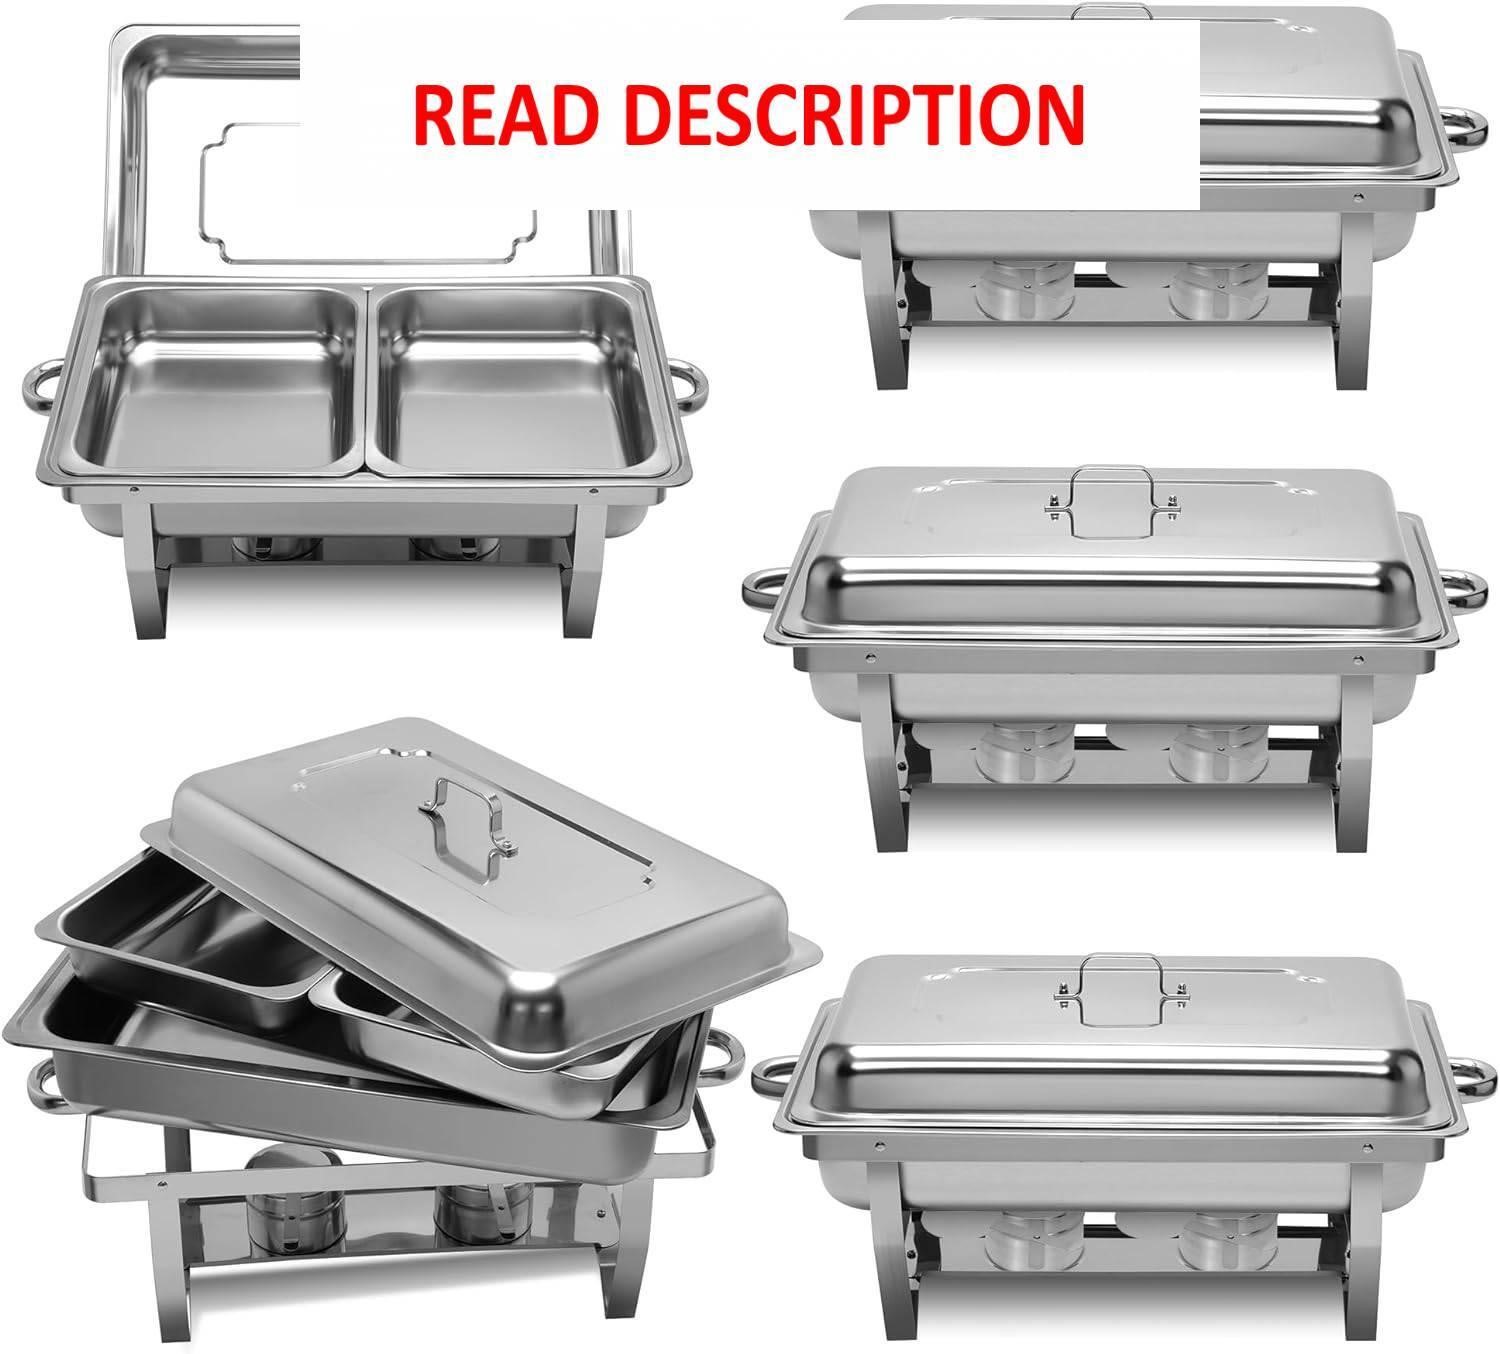 4 Pack 9QT Chafing Dish  Steel Chafer Set